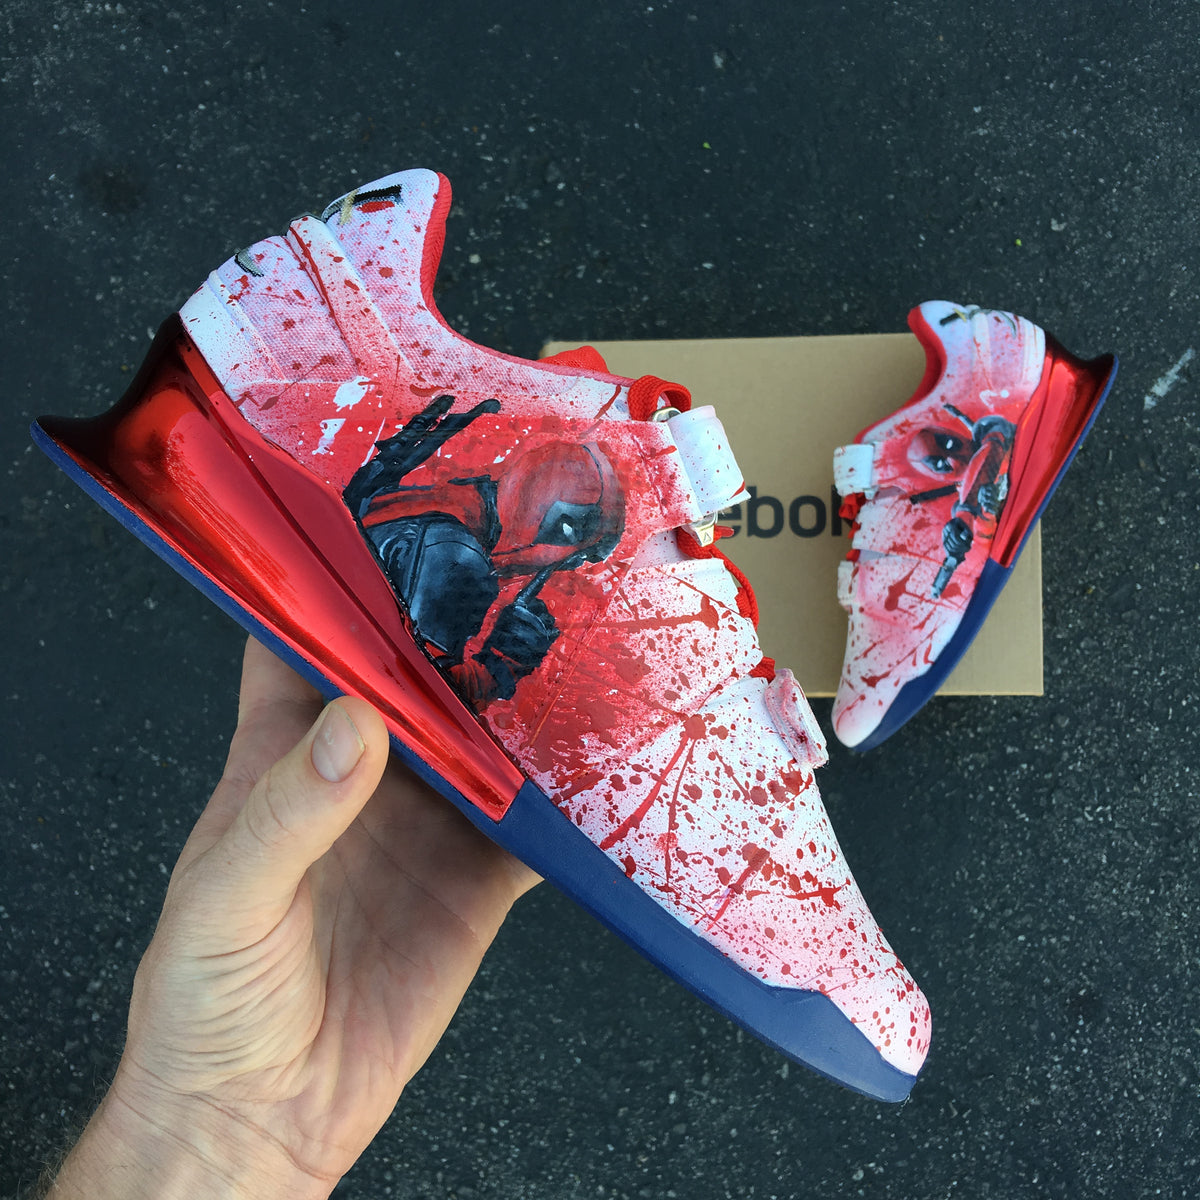 Your Name to the Deadpool, Bstreetshoes Might Make Custom Painted – Street Shoes